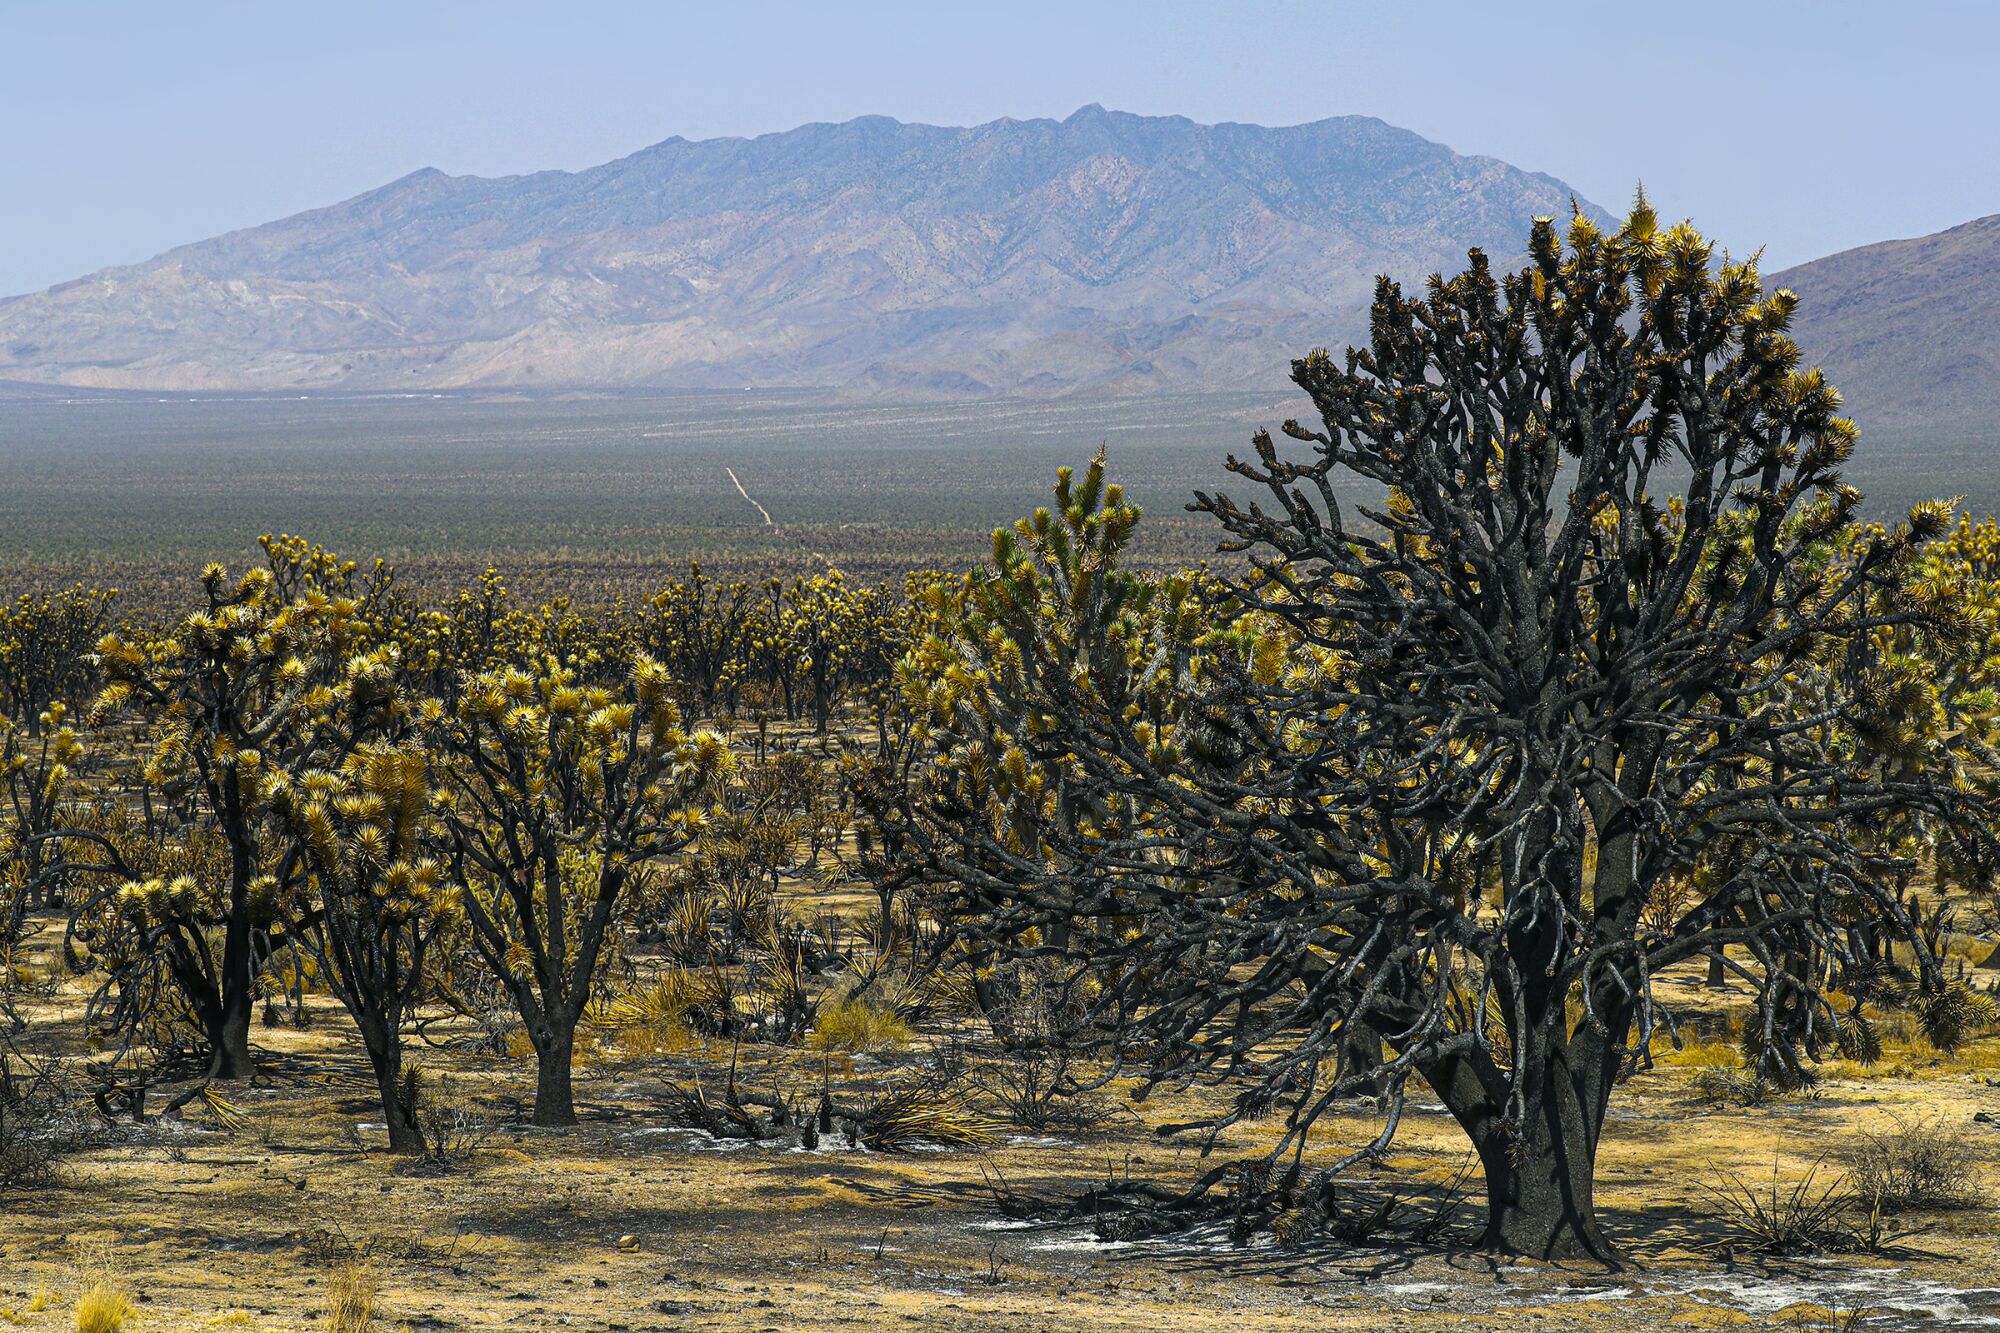 The Dome fire scorched 43,000 acres in the Mojave National Preserve.